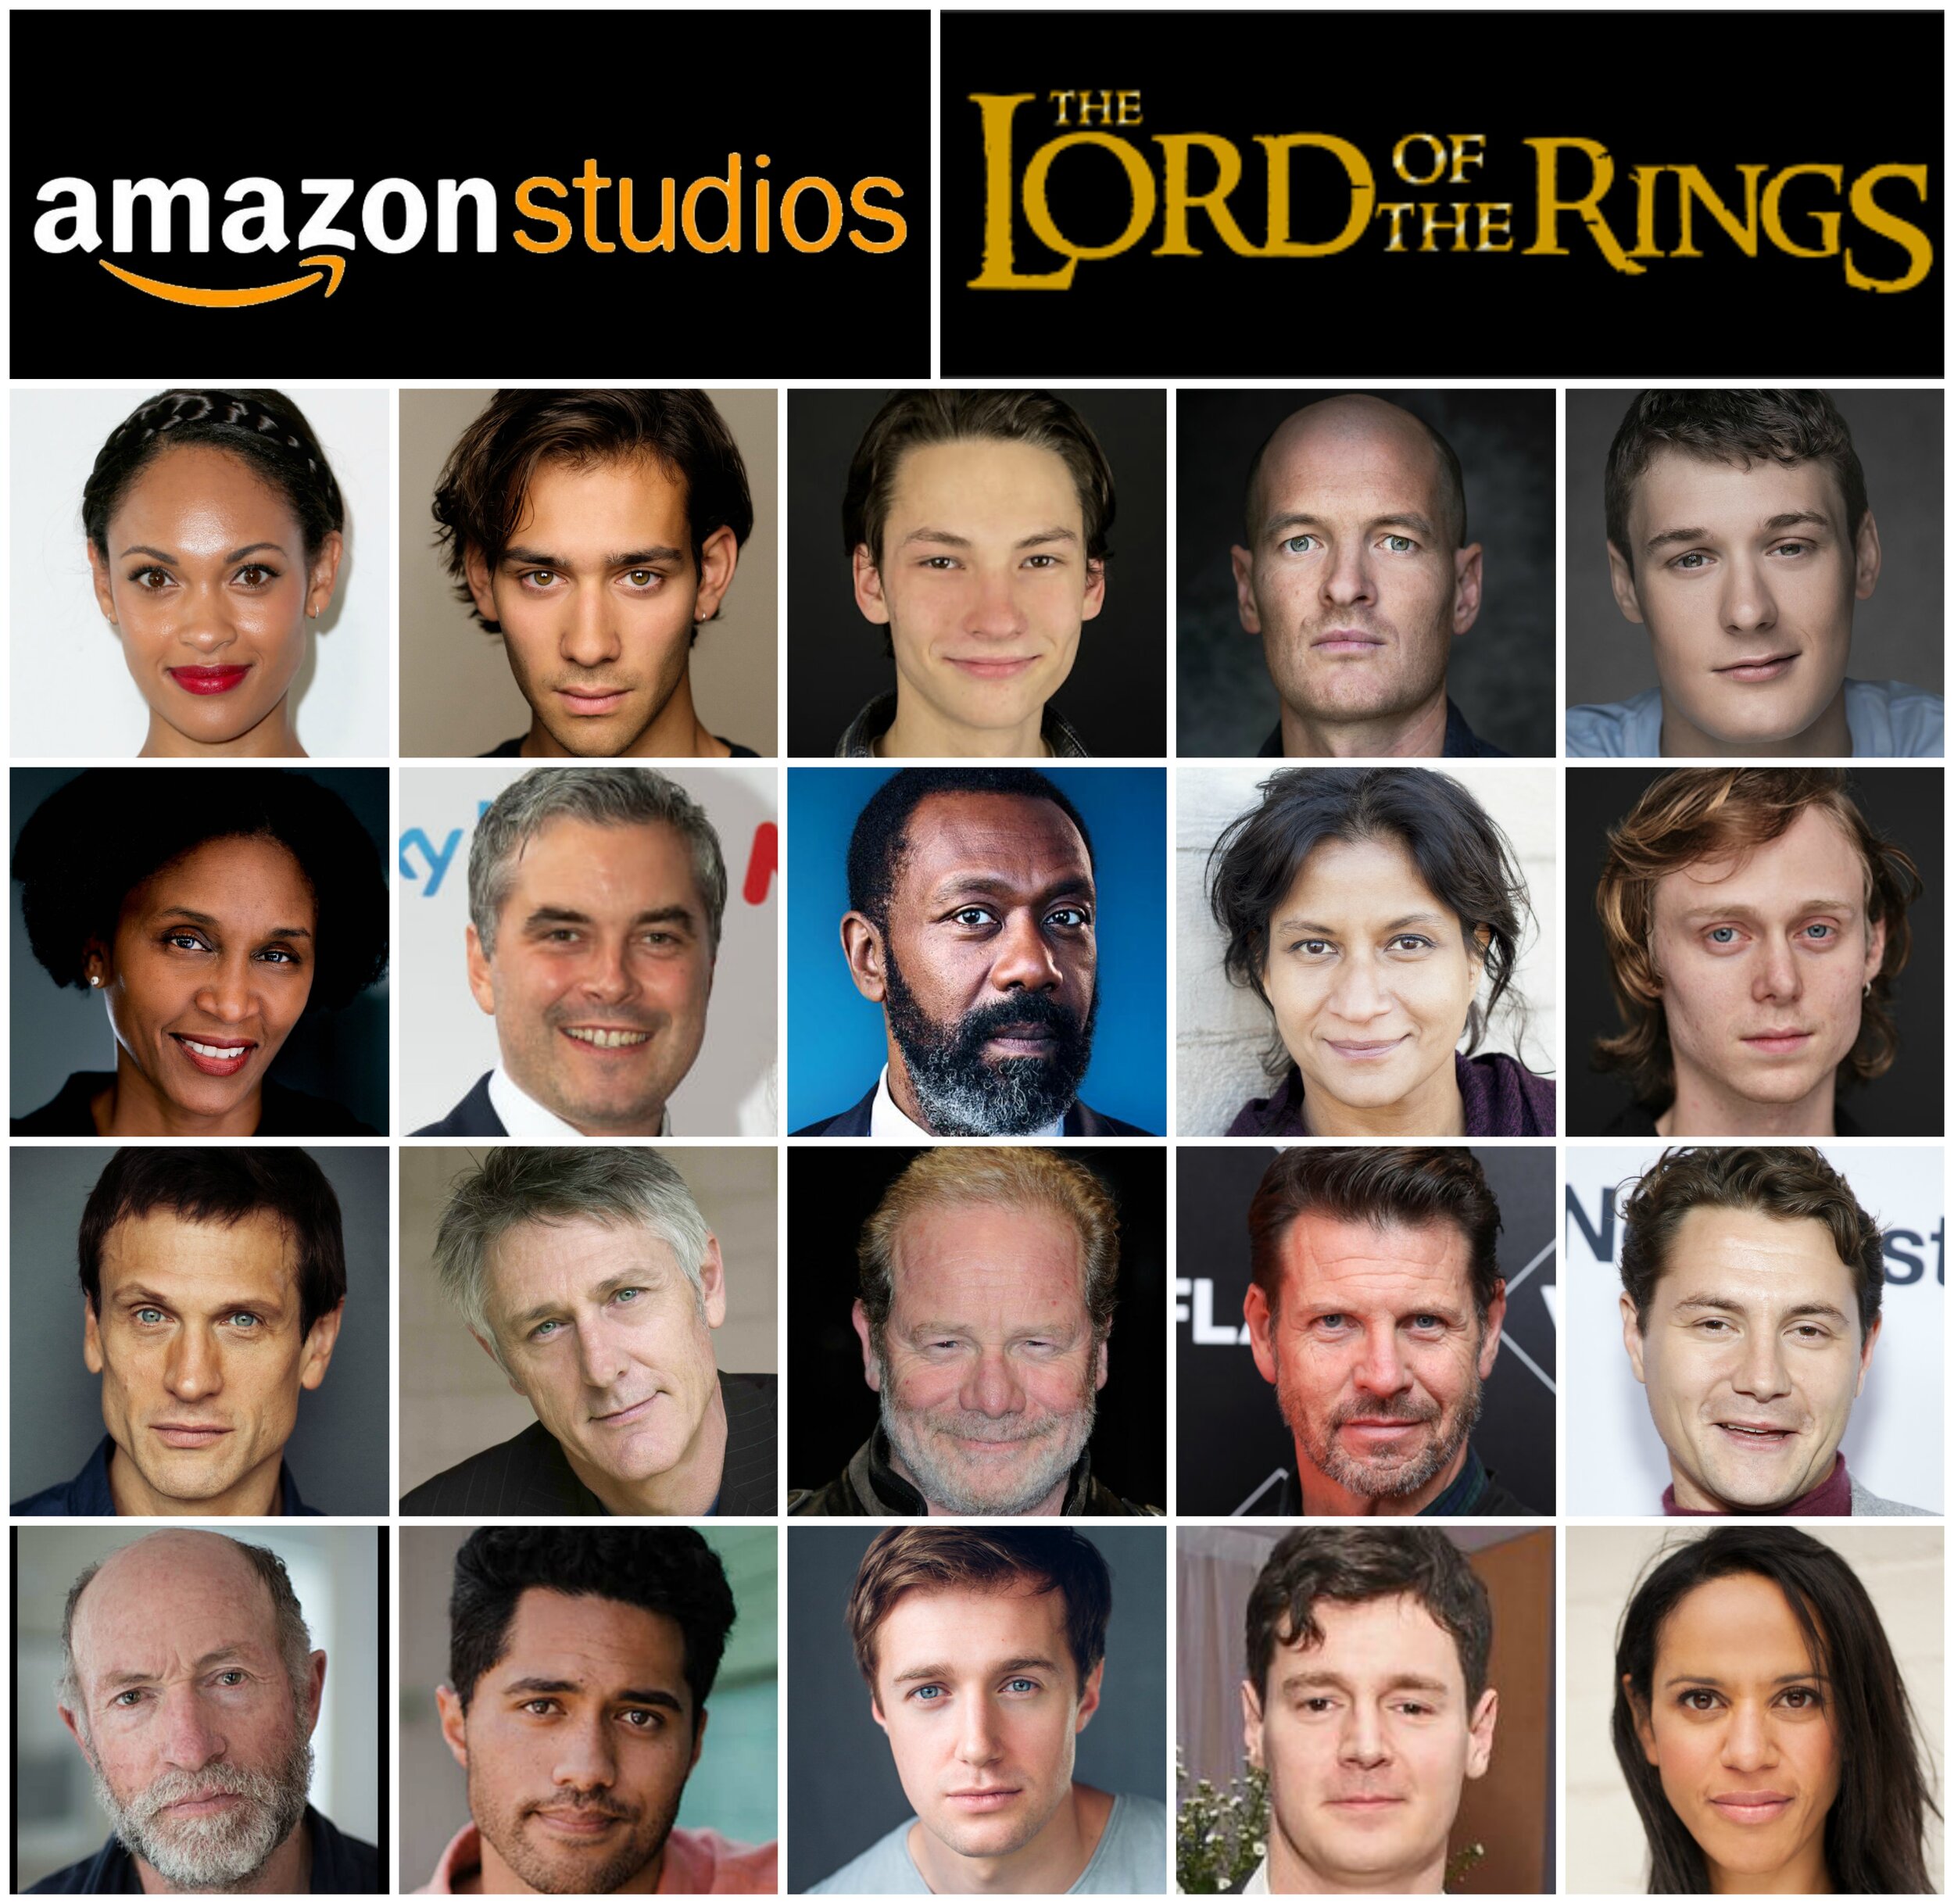 The Lord Of the Rings': Robert Aramayo To Star In Amazon TV Series